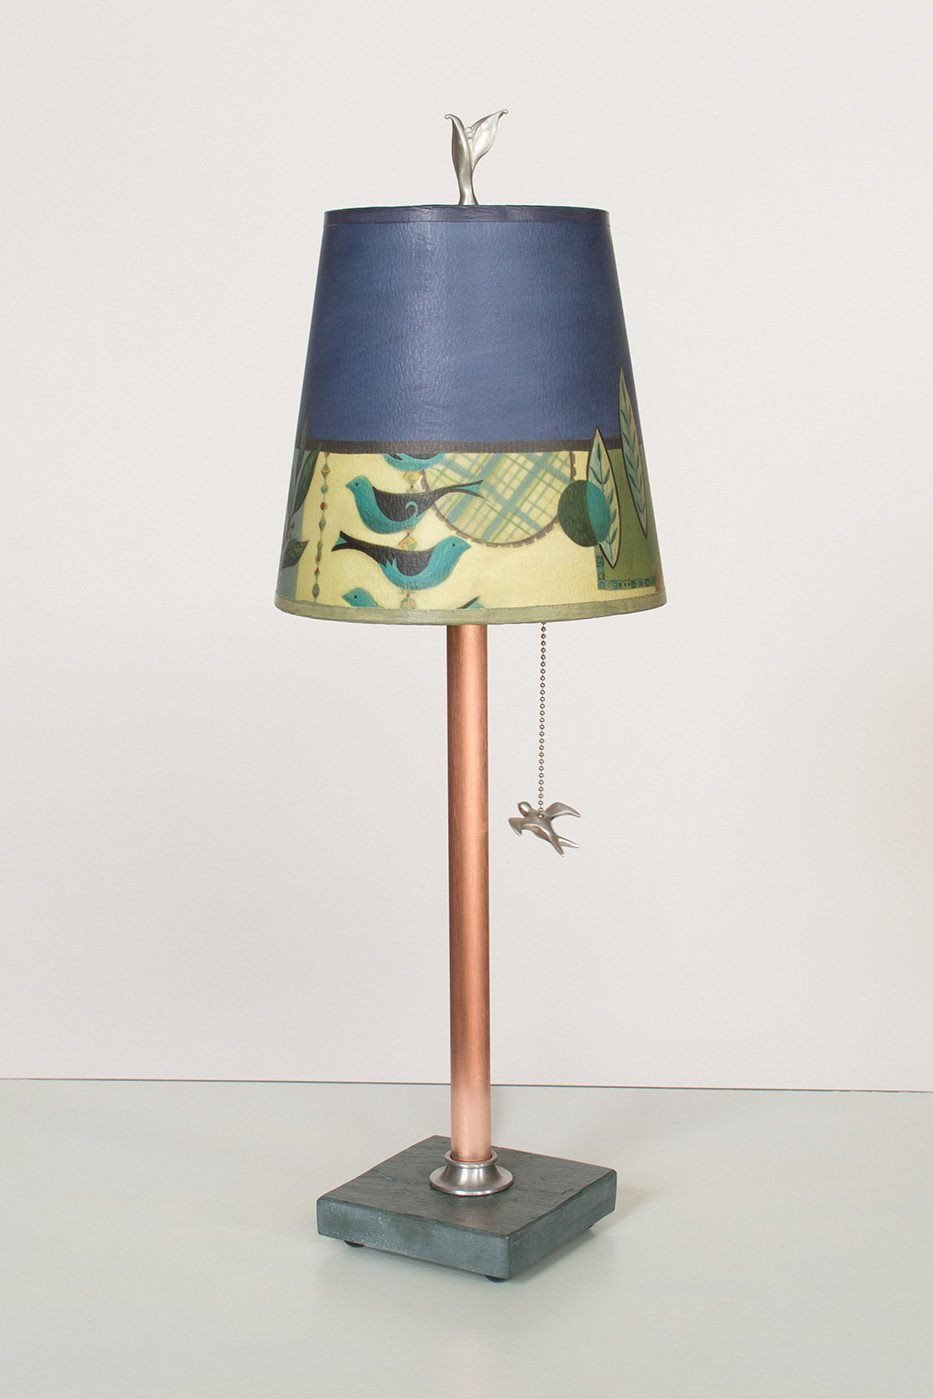 Copper Table Lamp on Vermont Slate Base with Small Drum Shade in New Capri Periwinkle Lit